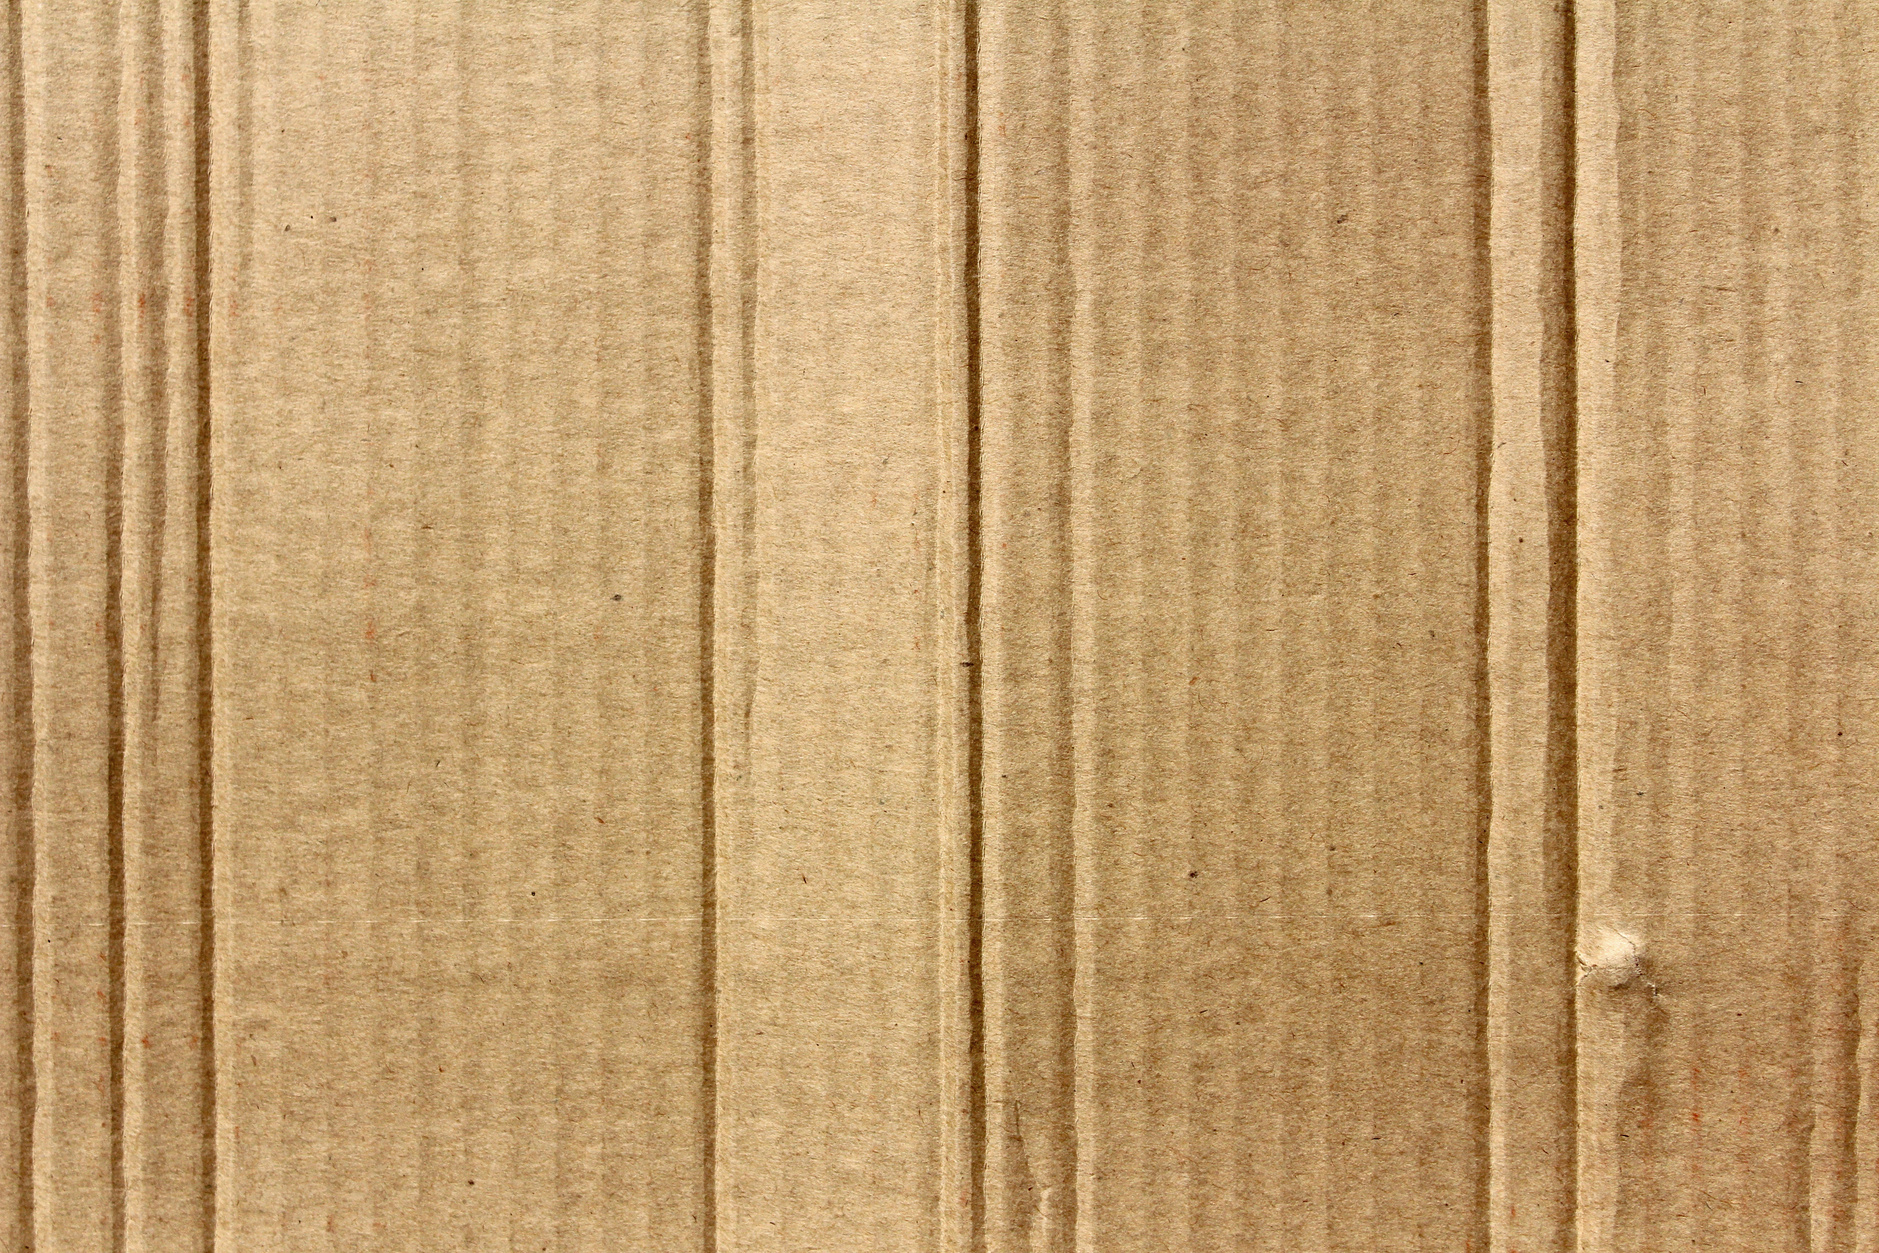 Paper Box Cardboard Texture or Background